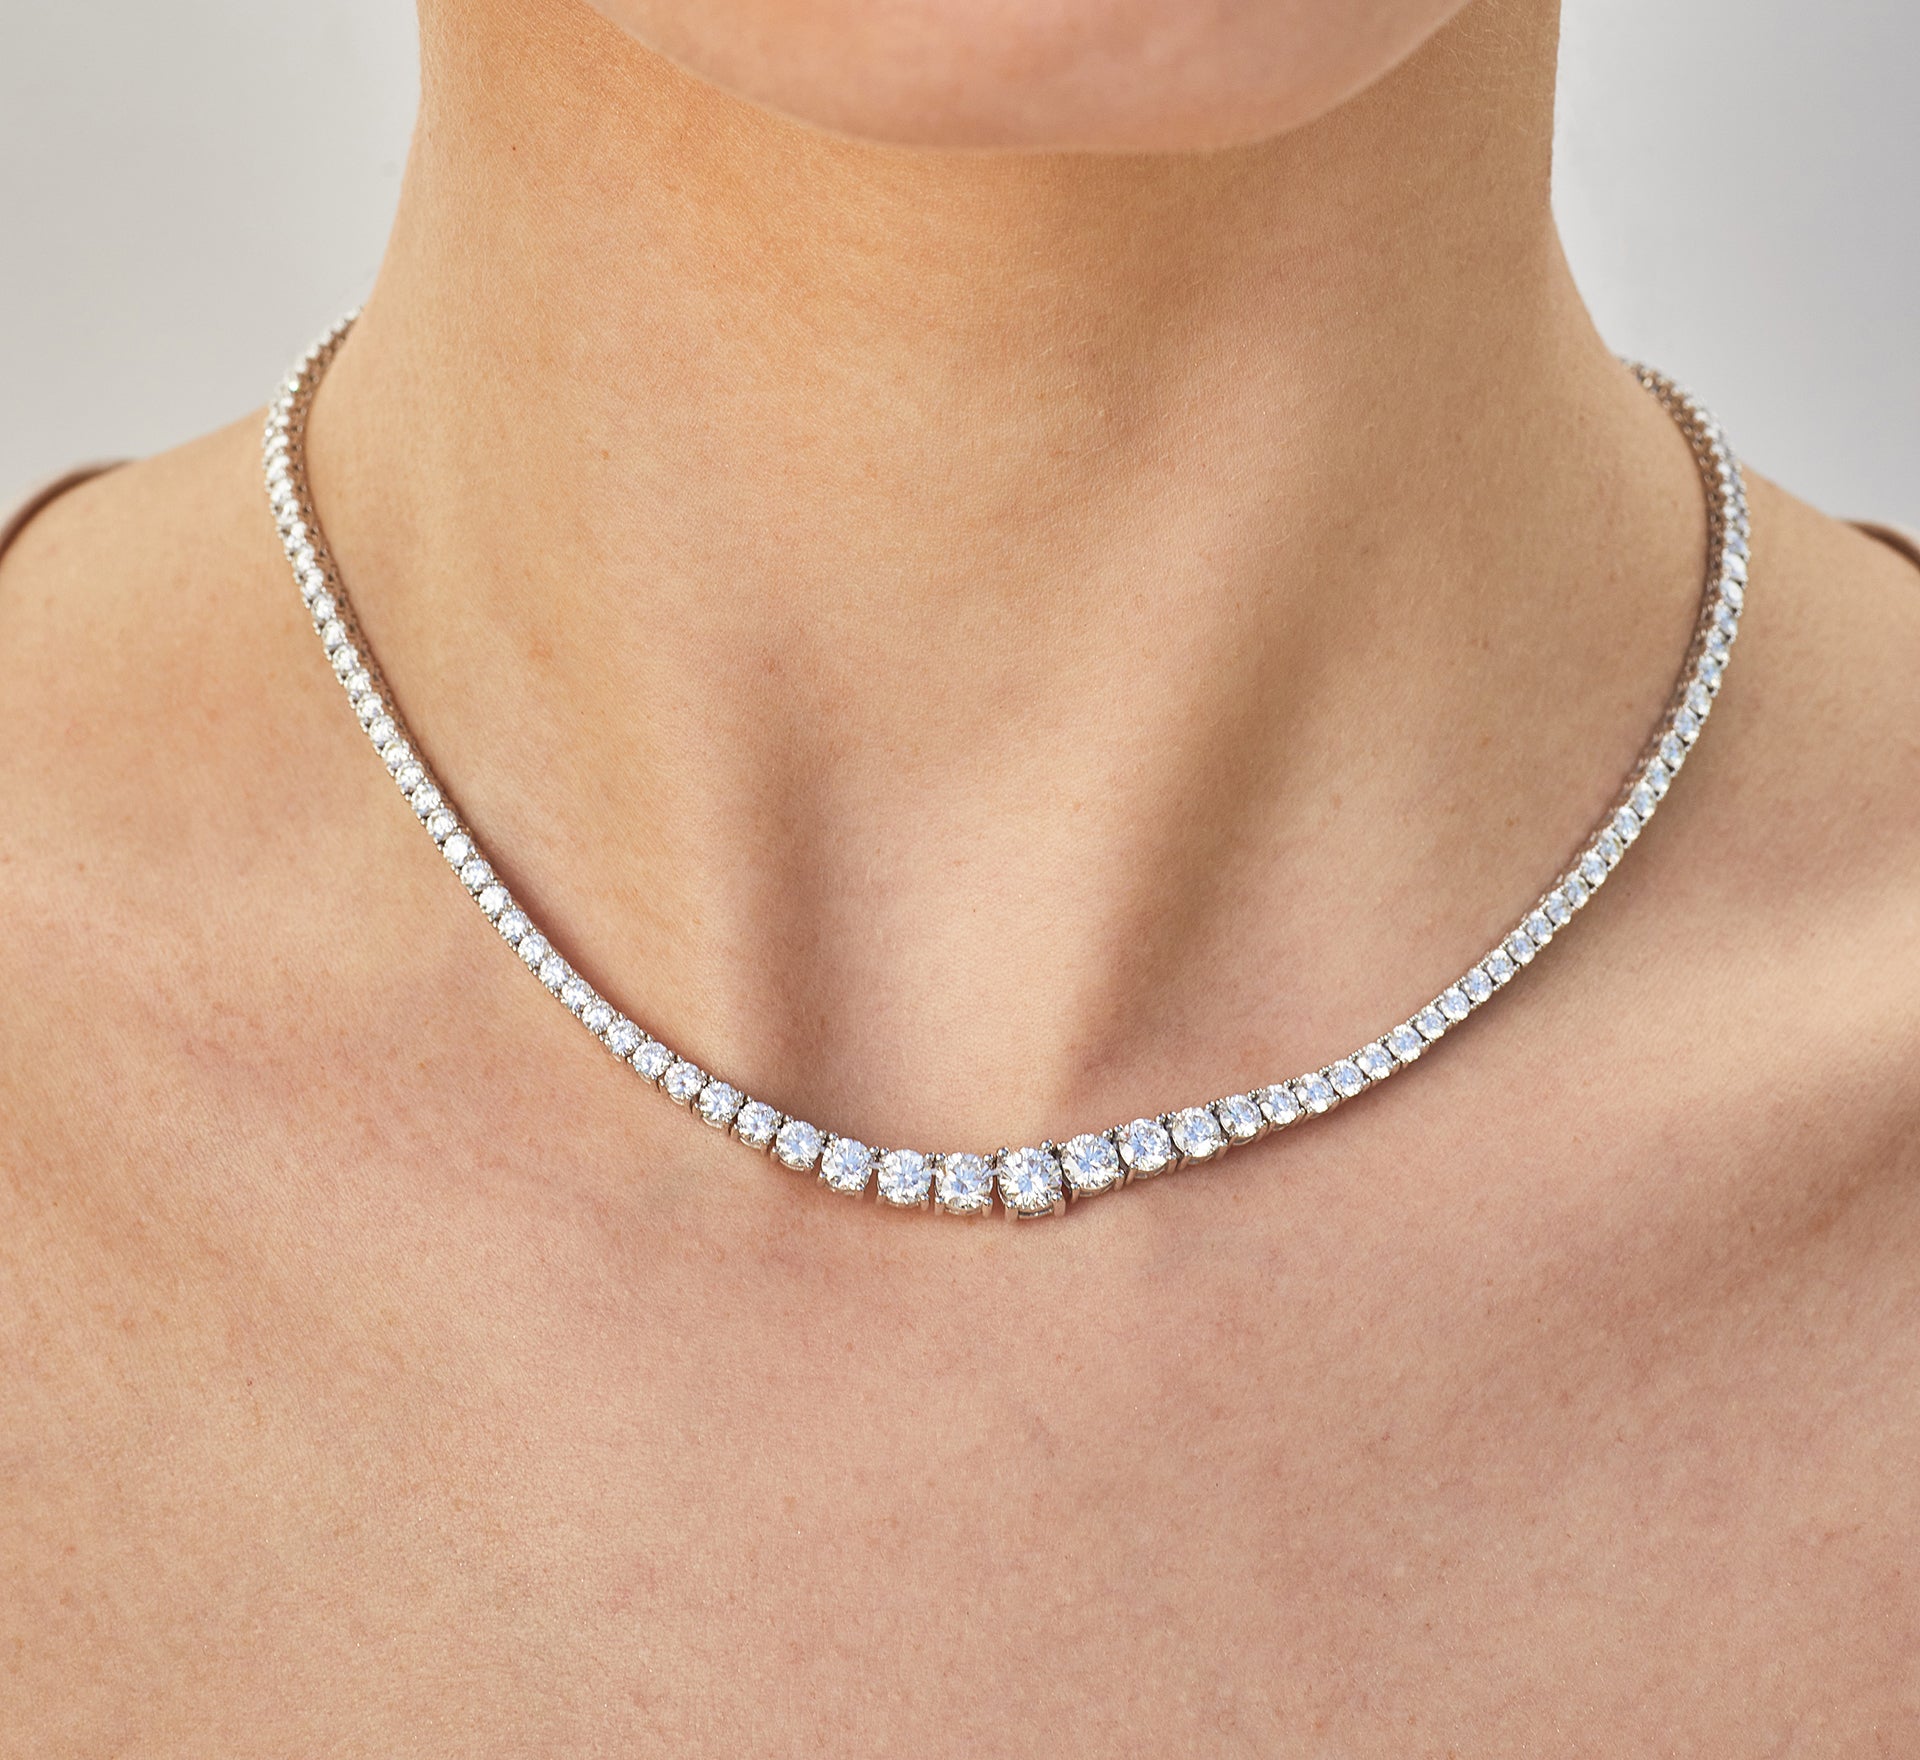 EF Collection diamond riviera tennis necklaces styled on neck of model